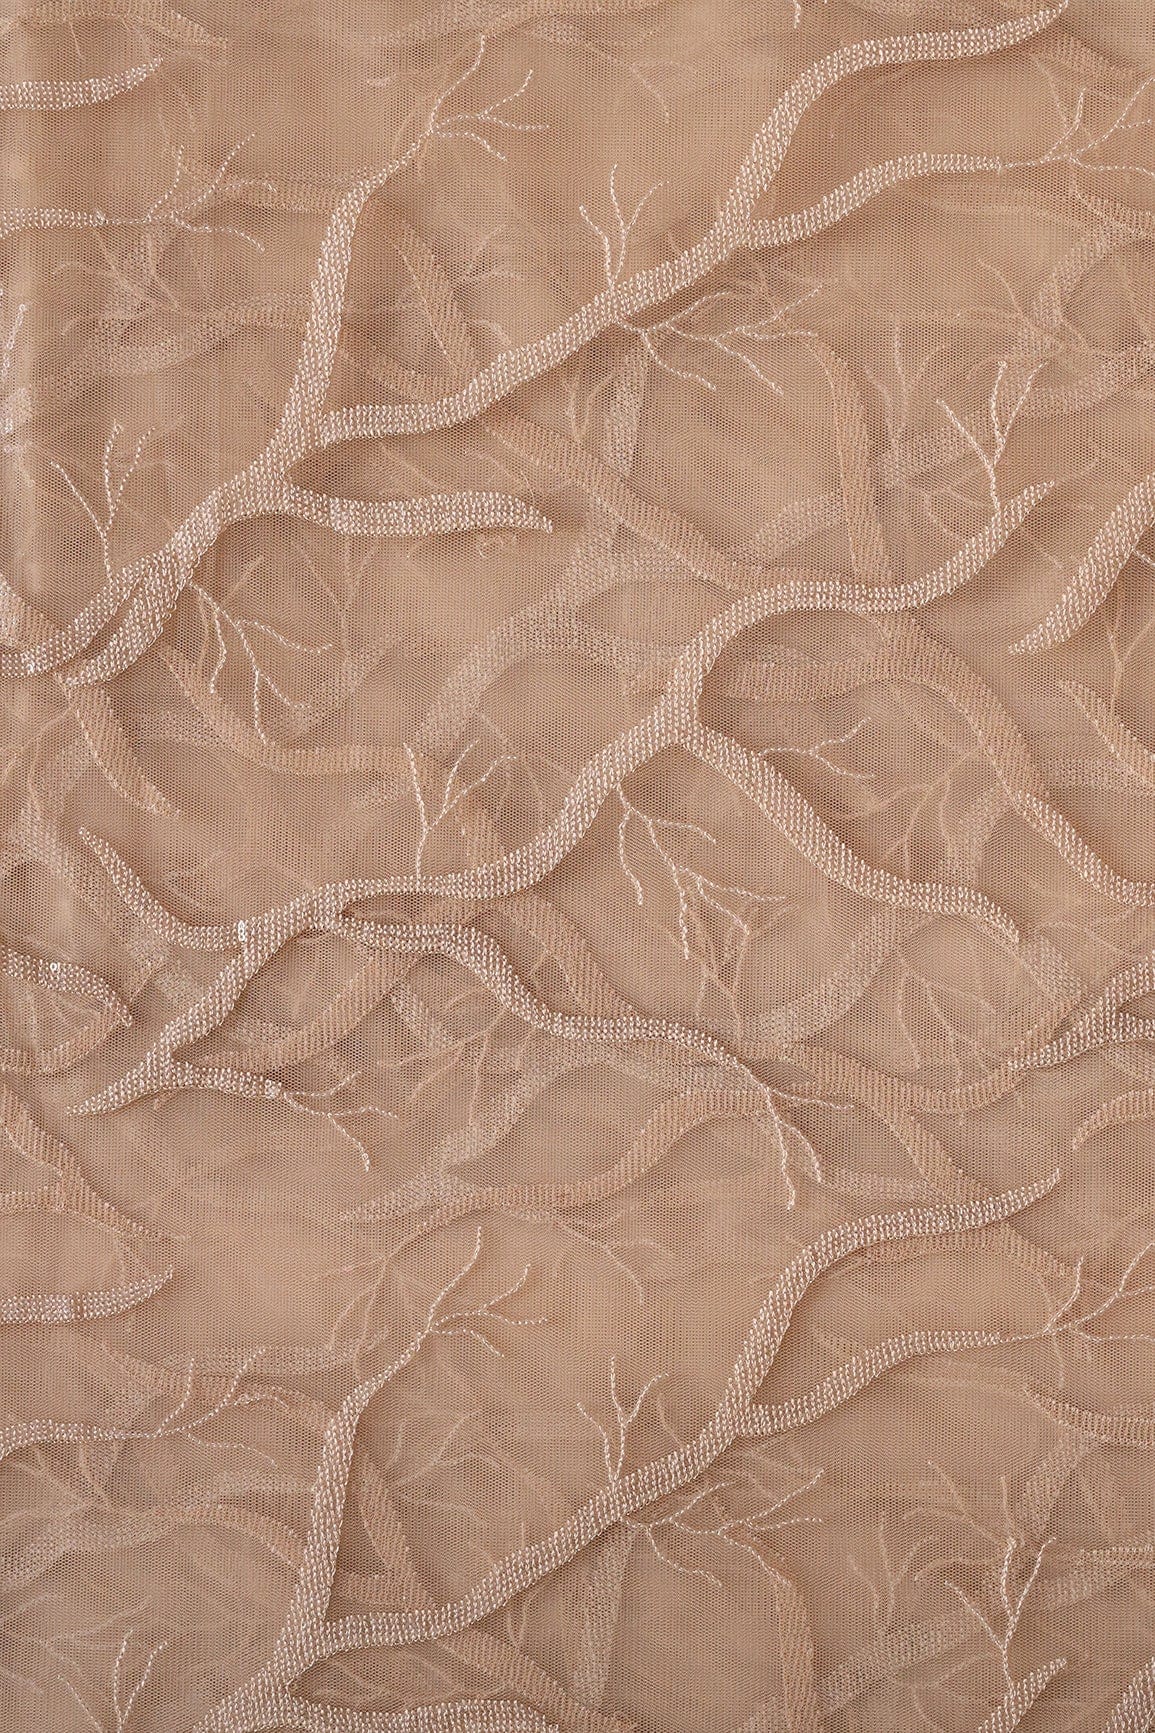 doeraa Embroidery Fabrics Beige Thread With Sequins Abstract Embroidery Work On Beige Soft Net Fabric